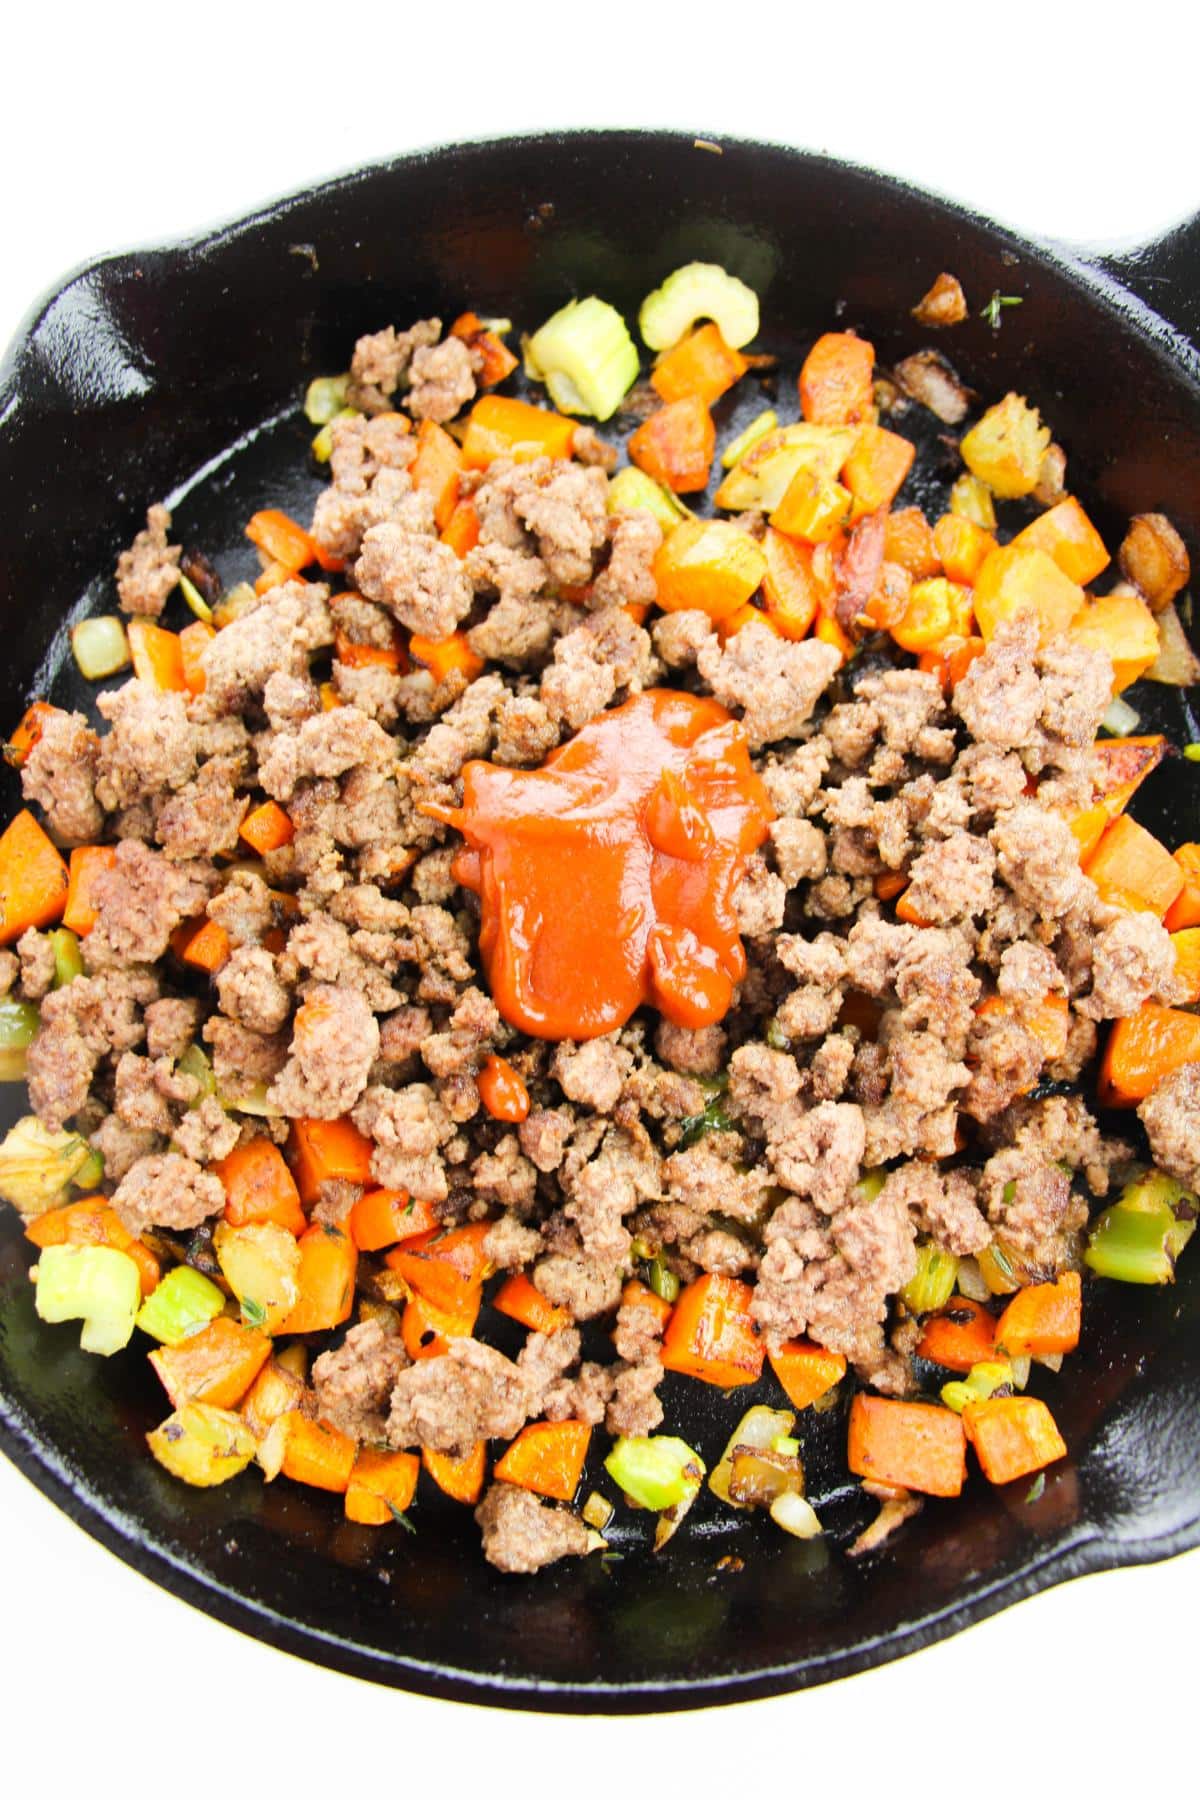 Cooked mixed vegetables, ground beef and tomato paste in cast iron skillet.